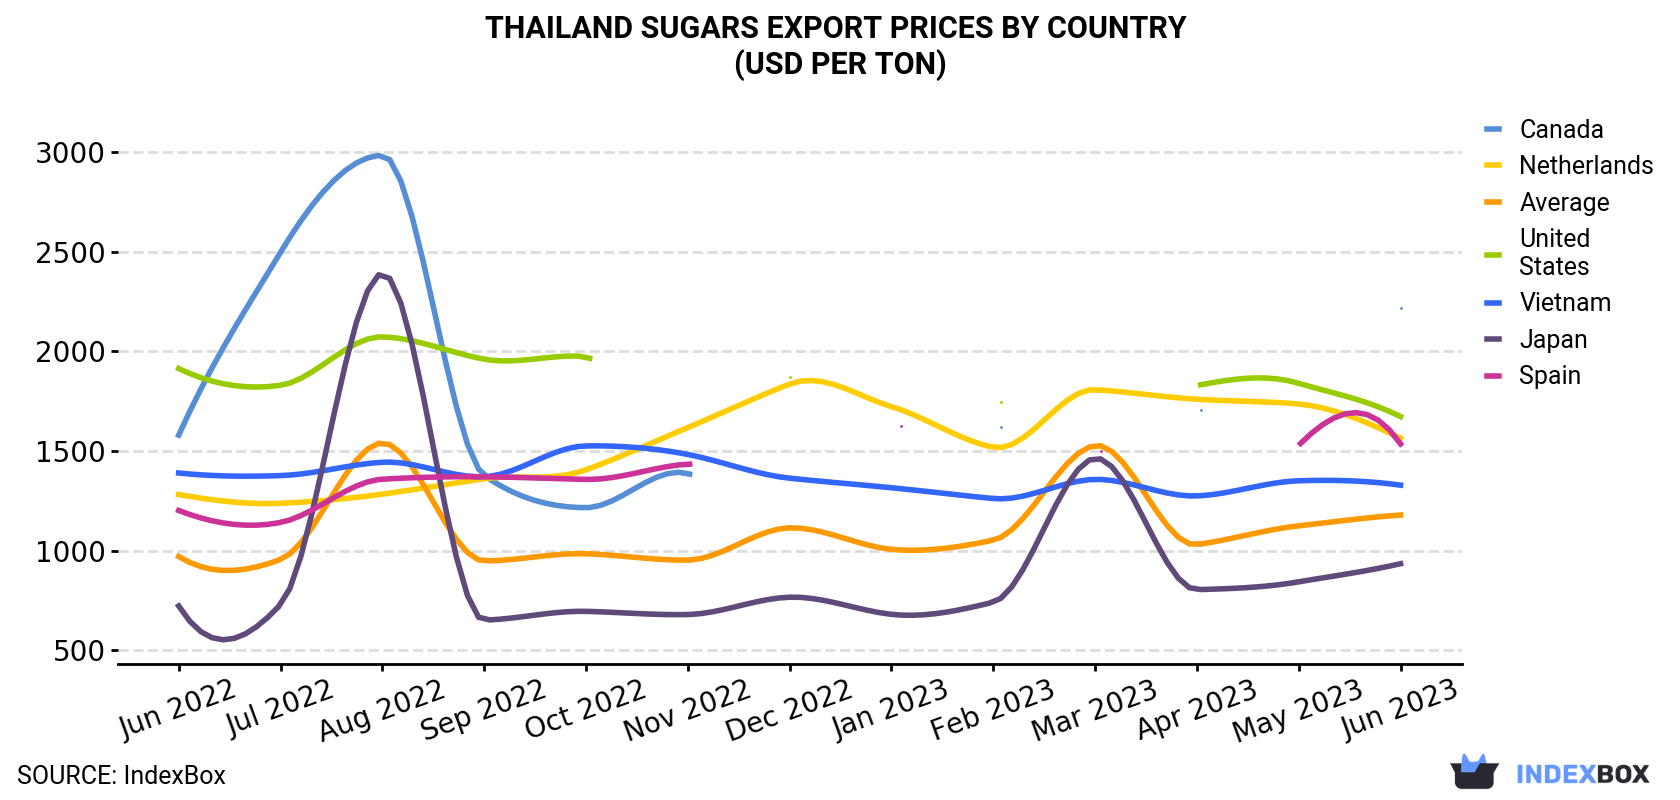 Thailand Sugars Export Prices By Country (USD Per Ton)